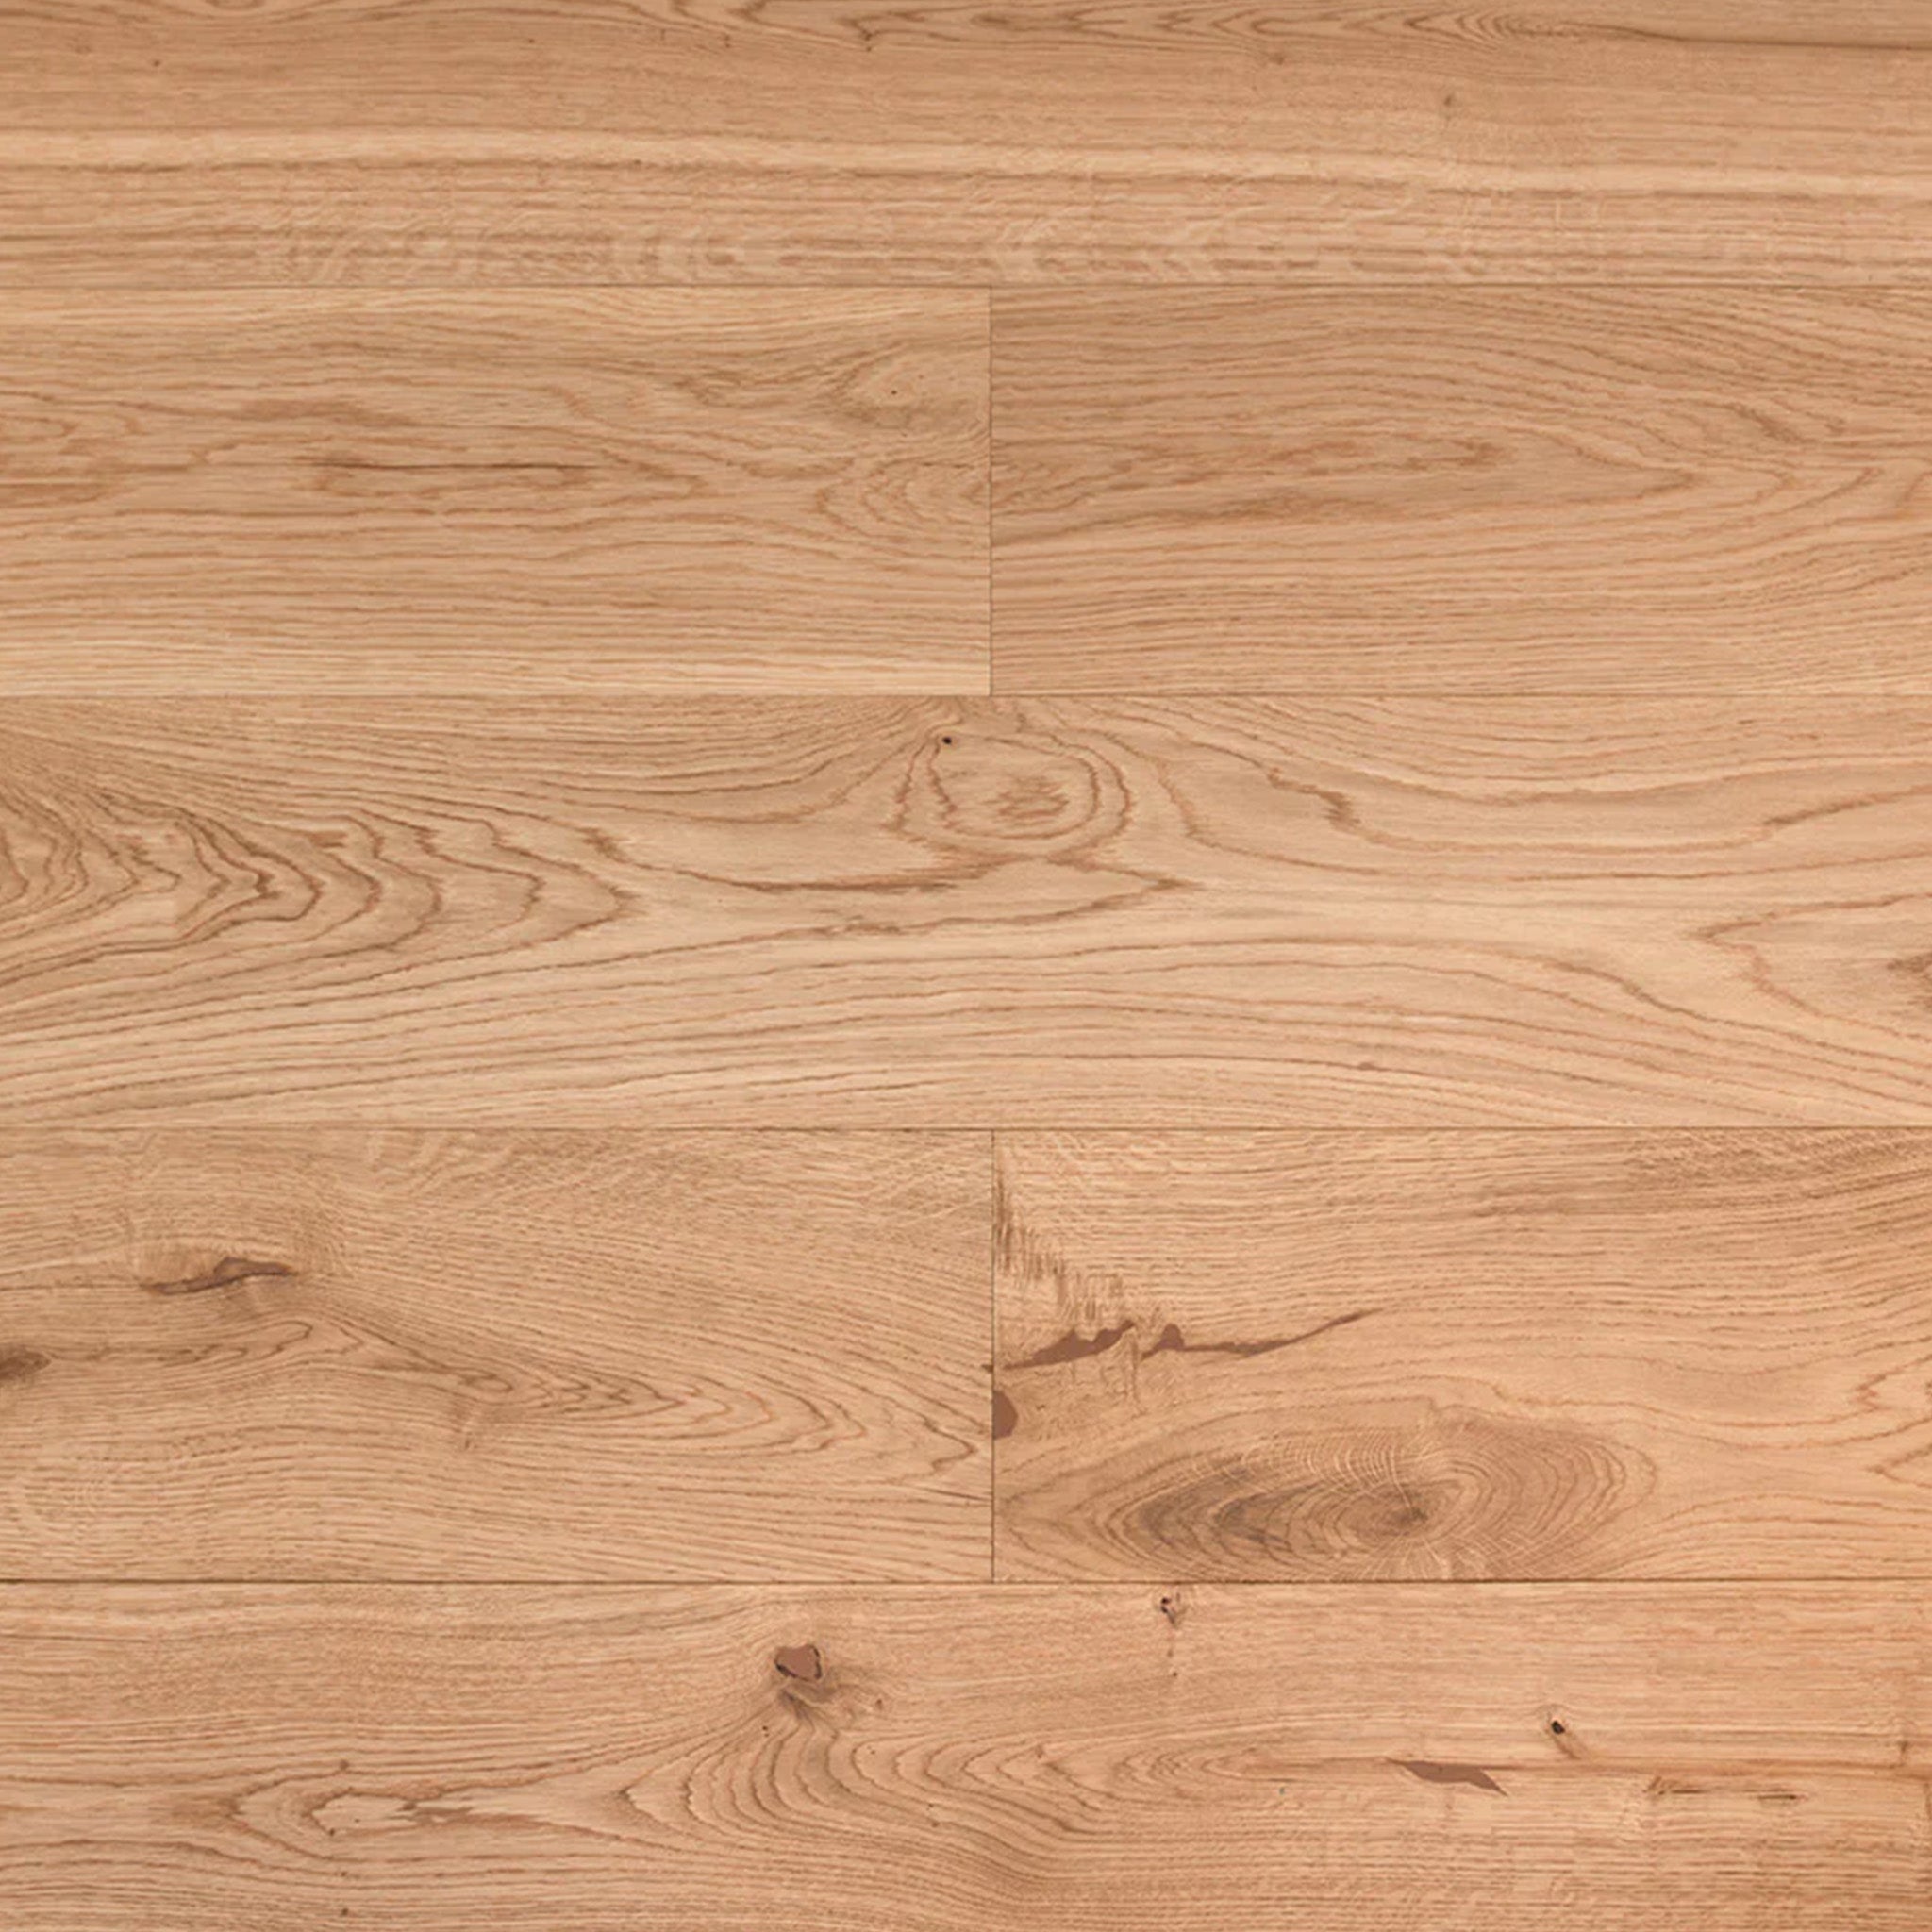 Mahonia Oak Natural Smooth Lacquered 14/3 x 190mm Straight Engineered